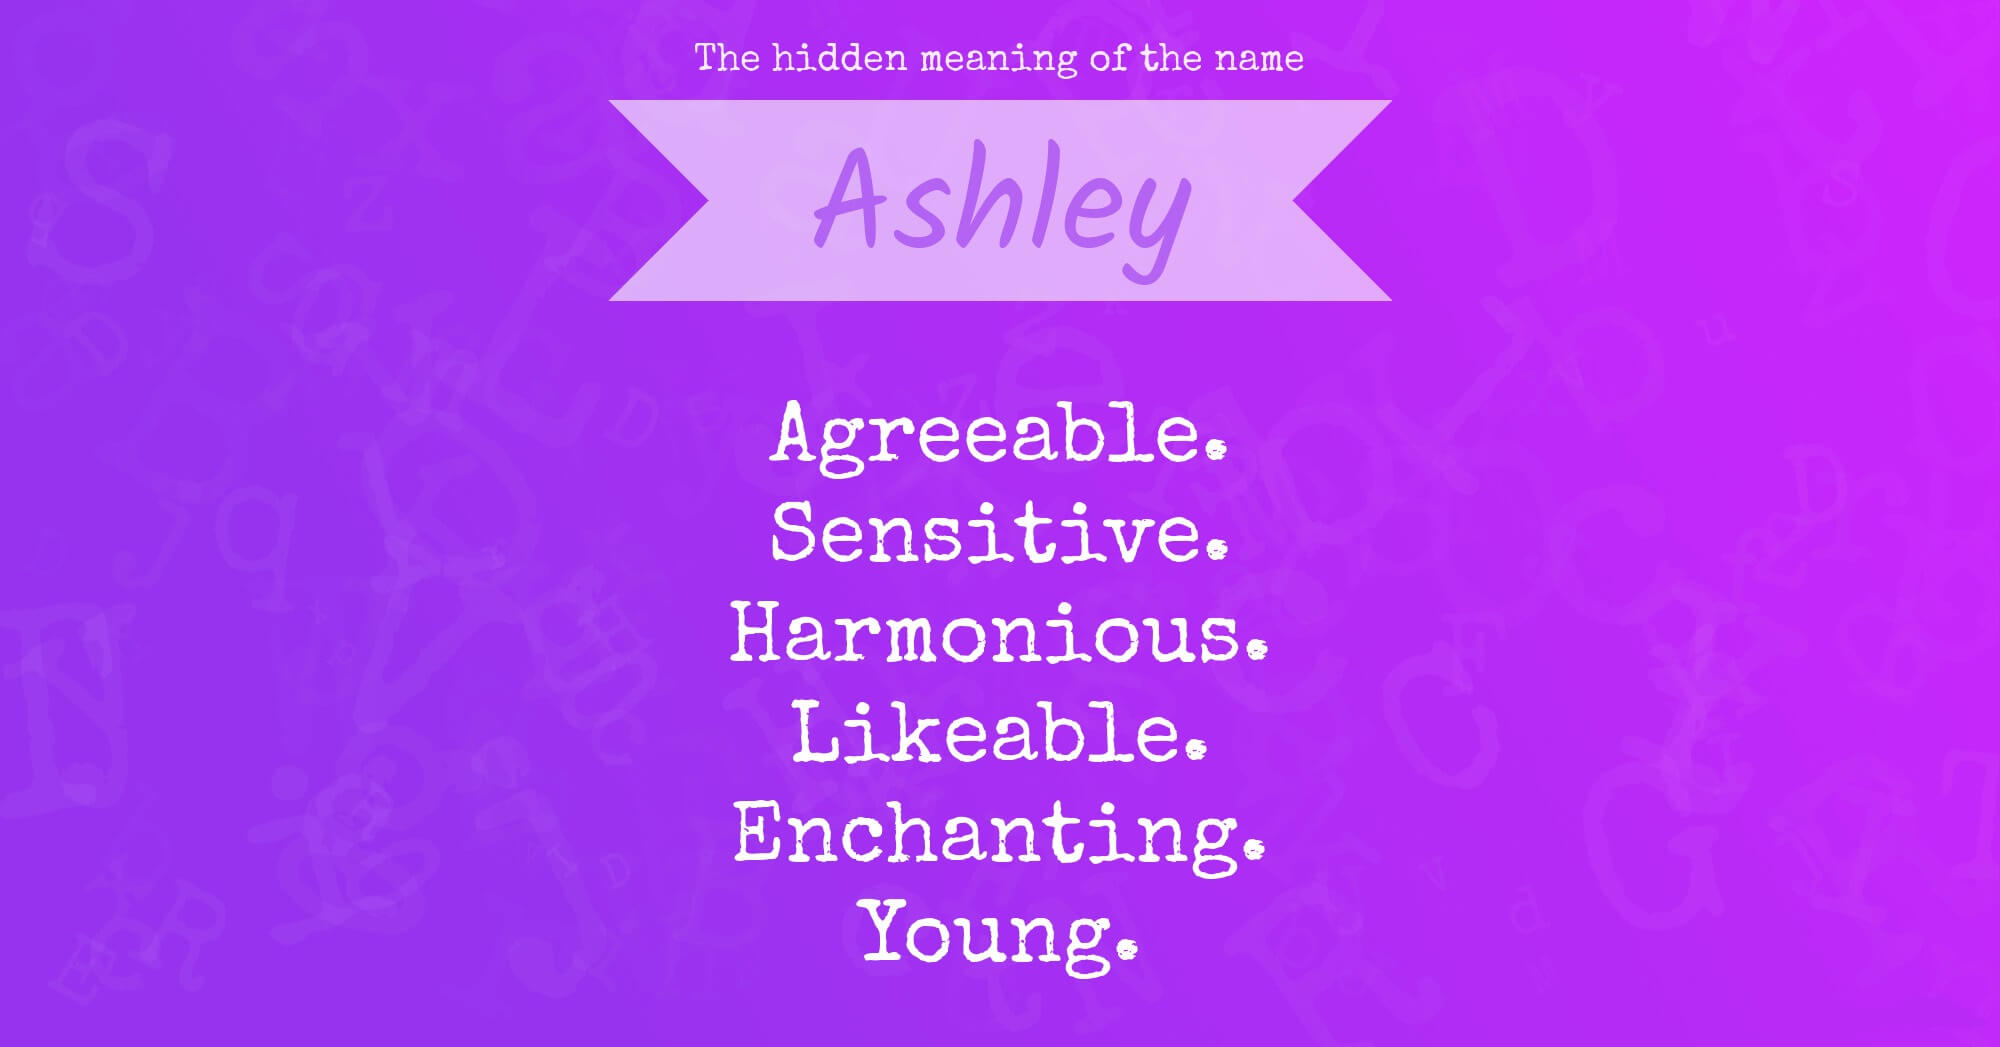 The Hidden Meaning of the Name Ashley